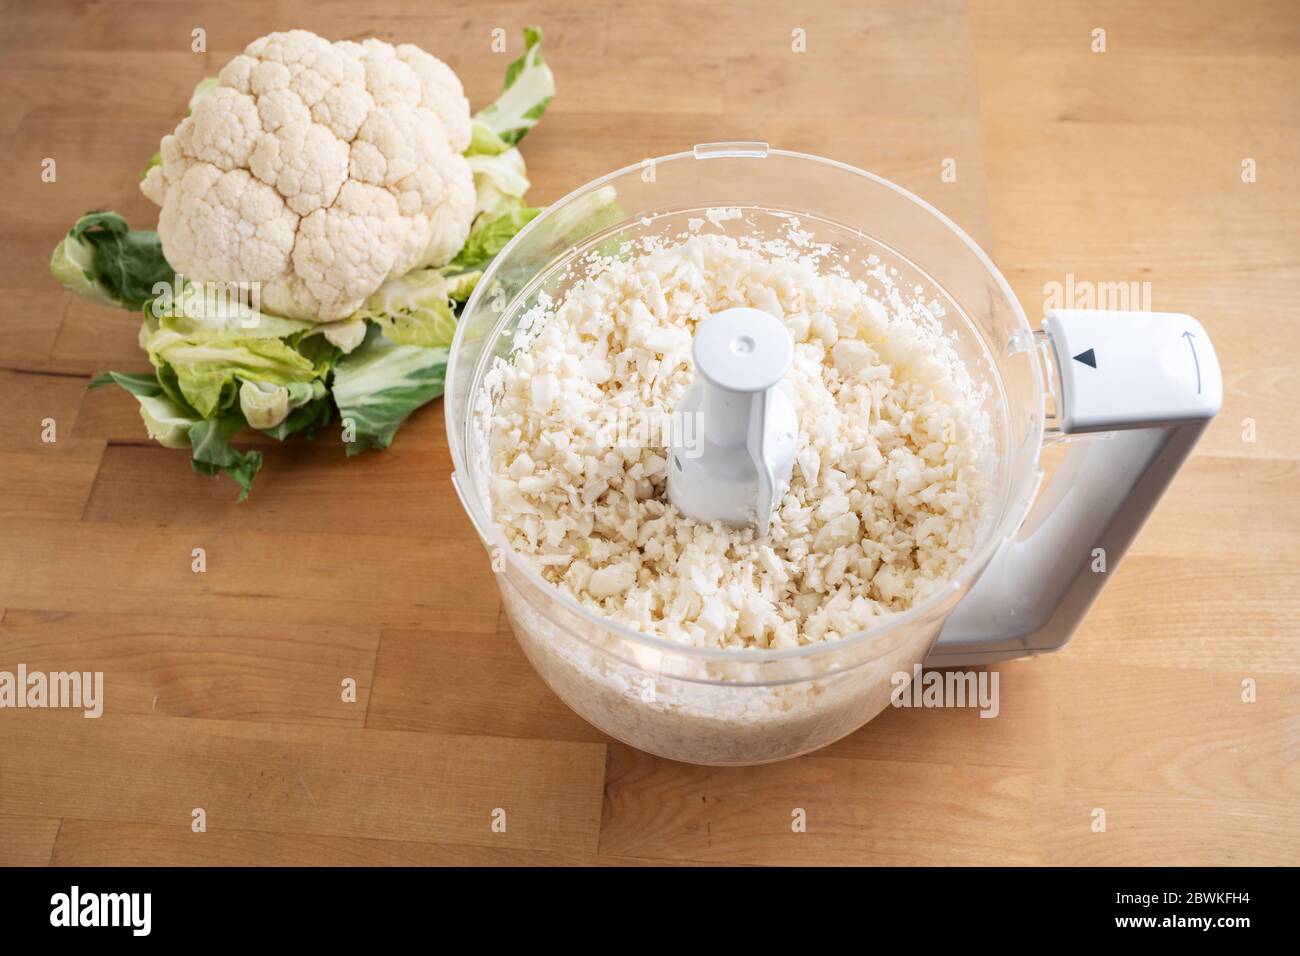 cauliflower shredded in a food processor for healthy low carb pizza crust or as vegetable rice replacement on a wooden kitchen table Stock Photo